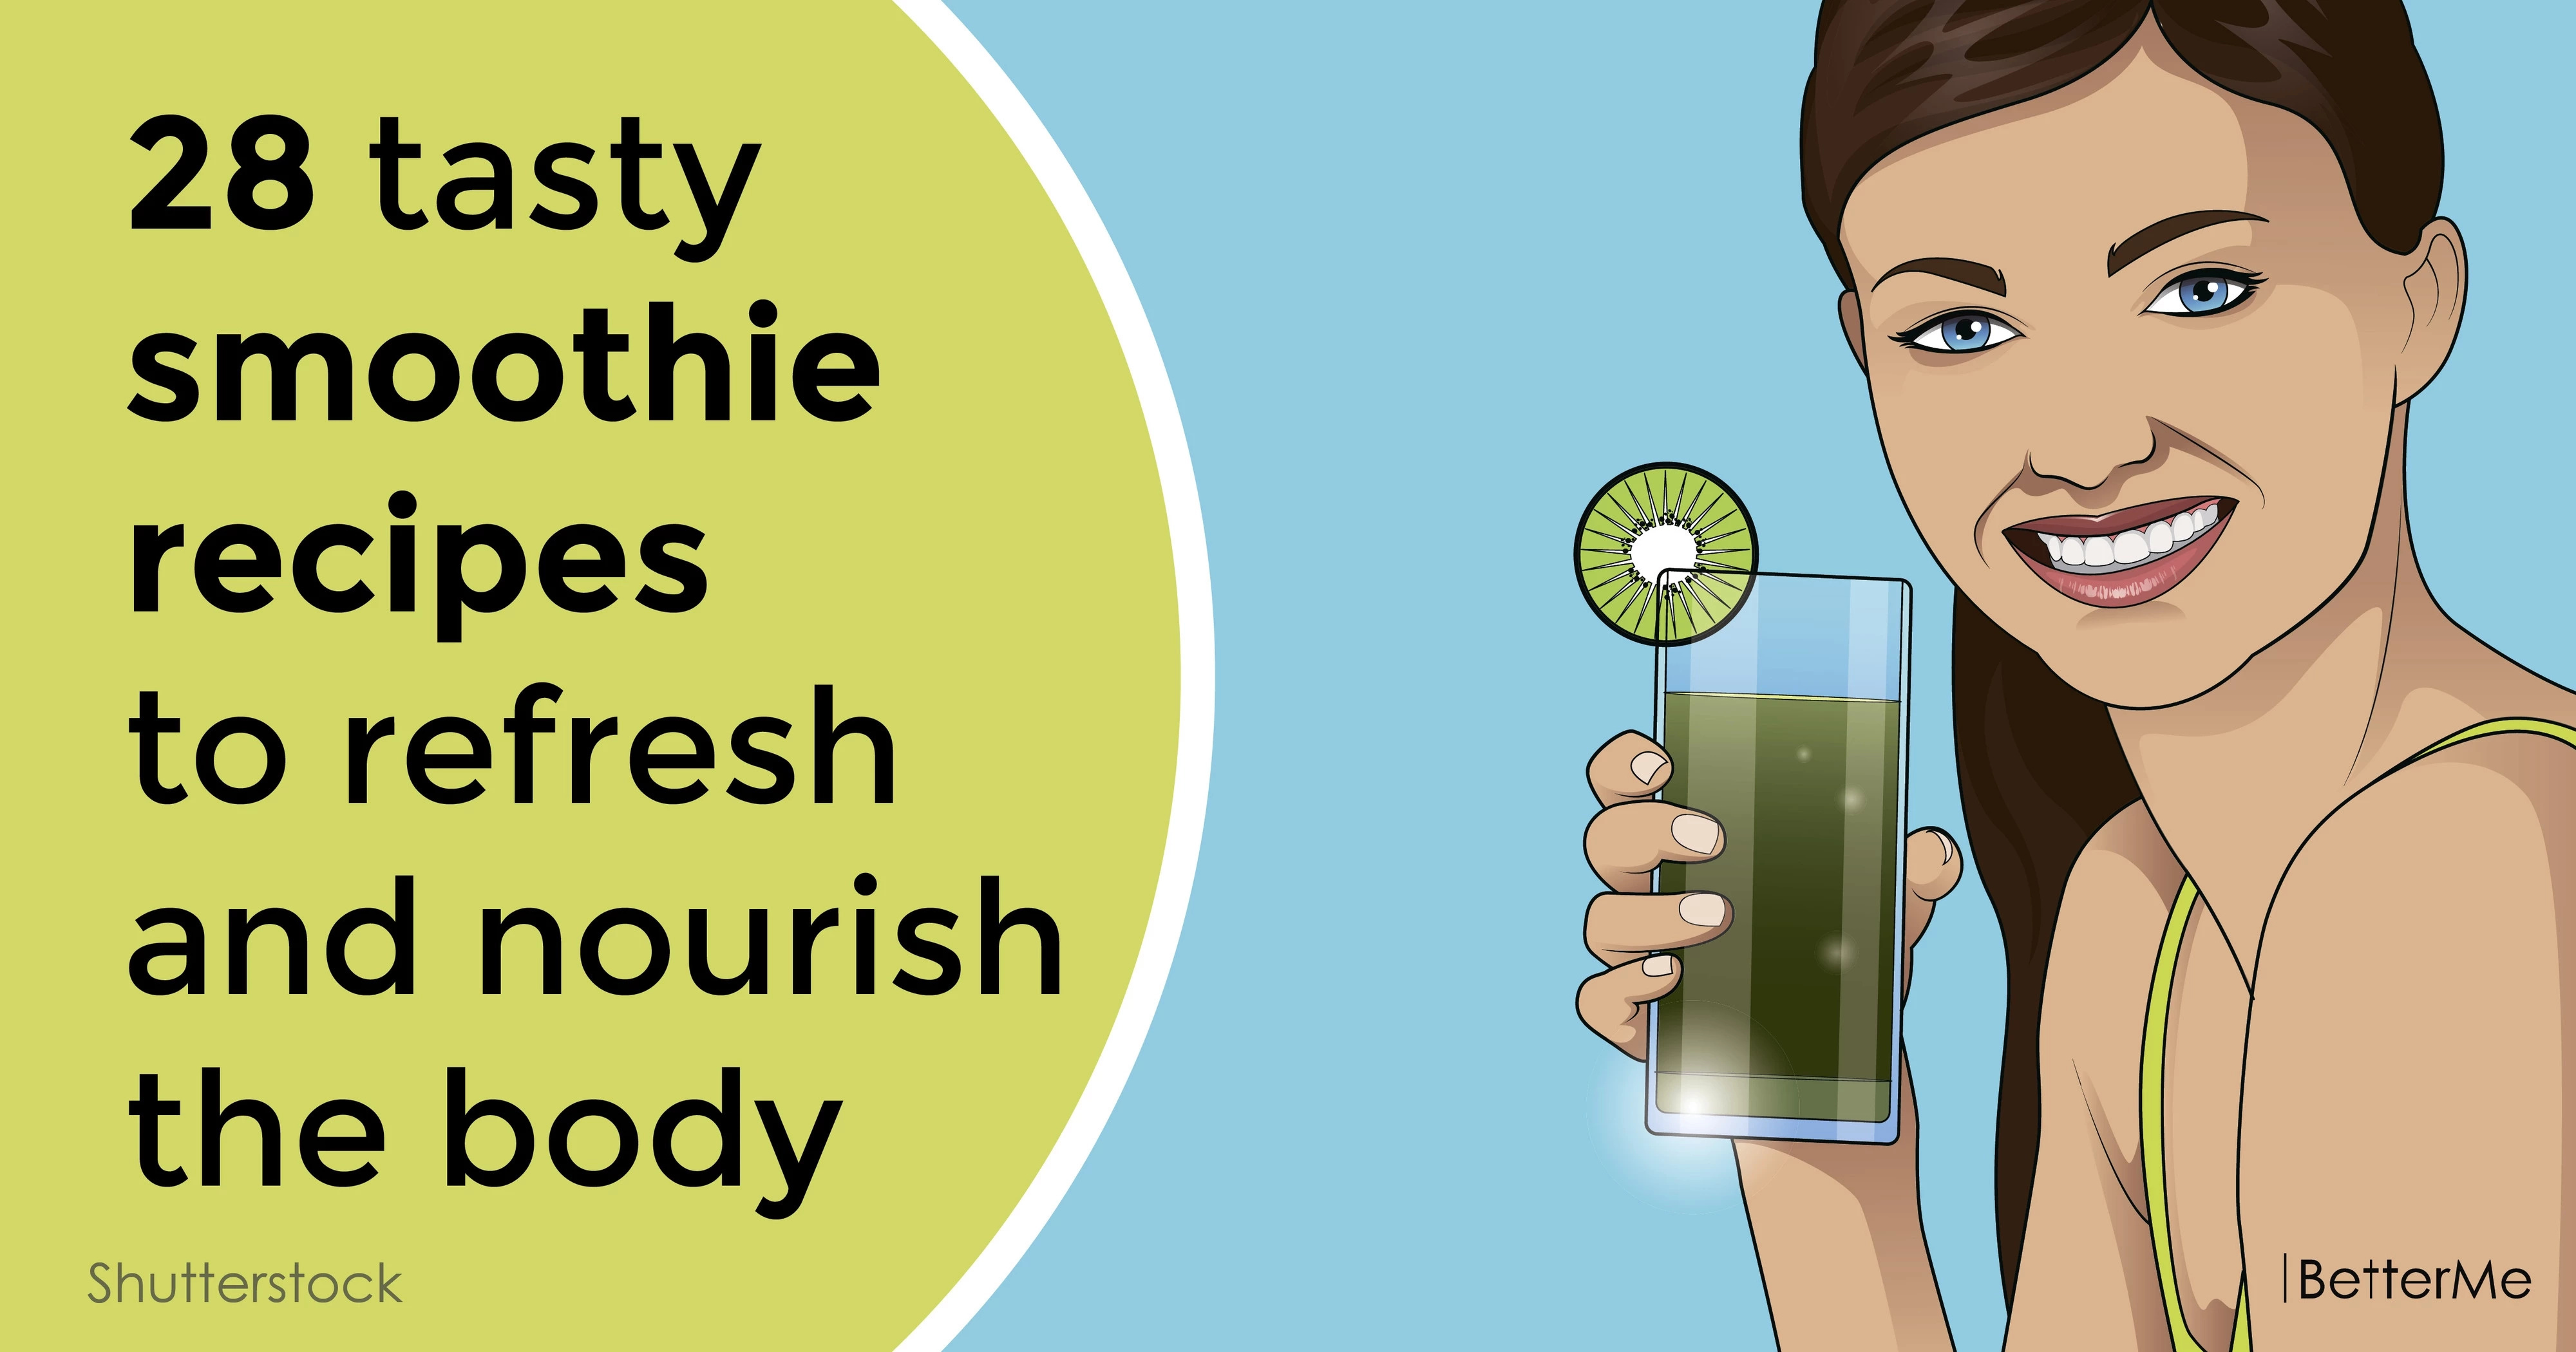 28 tasty smoothie recipes to refresh and nourish the body